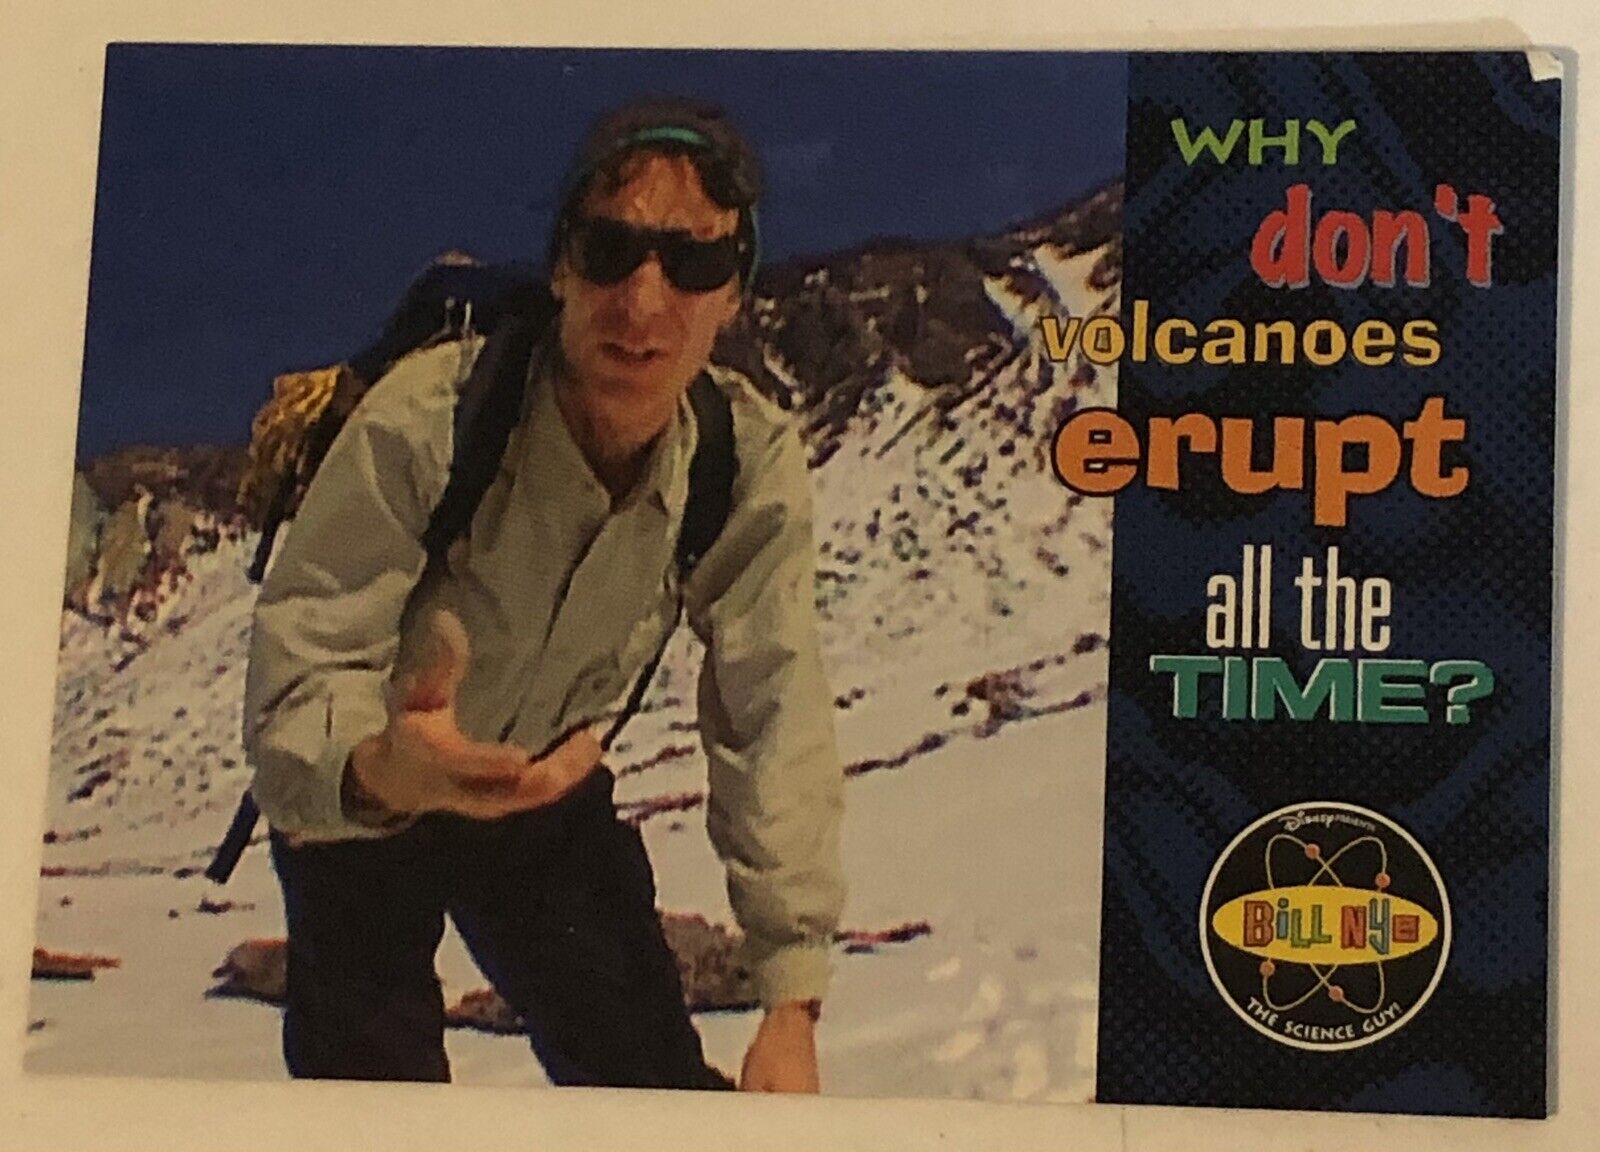 Bill Nye The Science Guy Trading Card  #01 Earth’s Crust